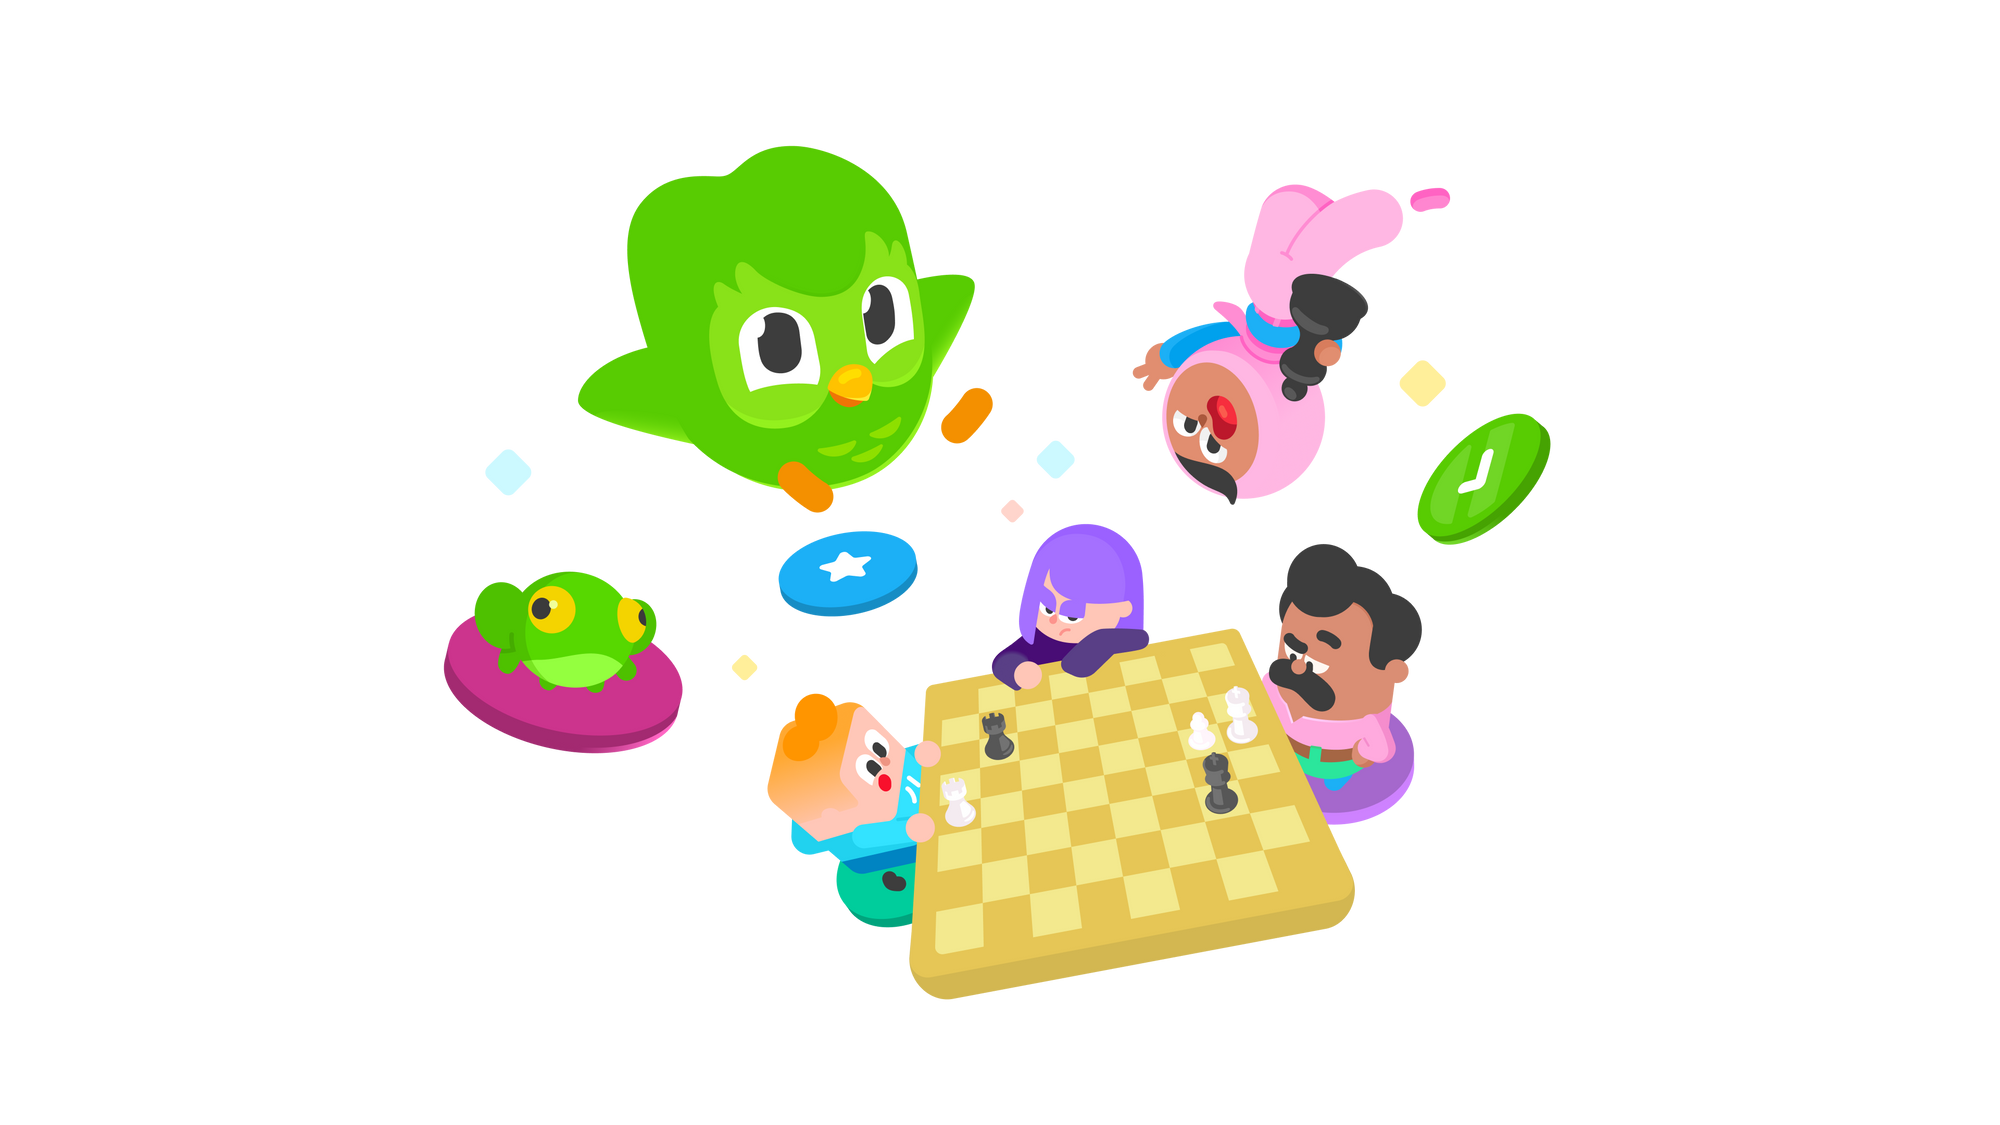 Illustration of Lily, Junior, and Oscar around a chess board, with Duo, Zari, and Duolingo path icons (and a frog?!) floating above them.